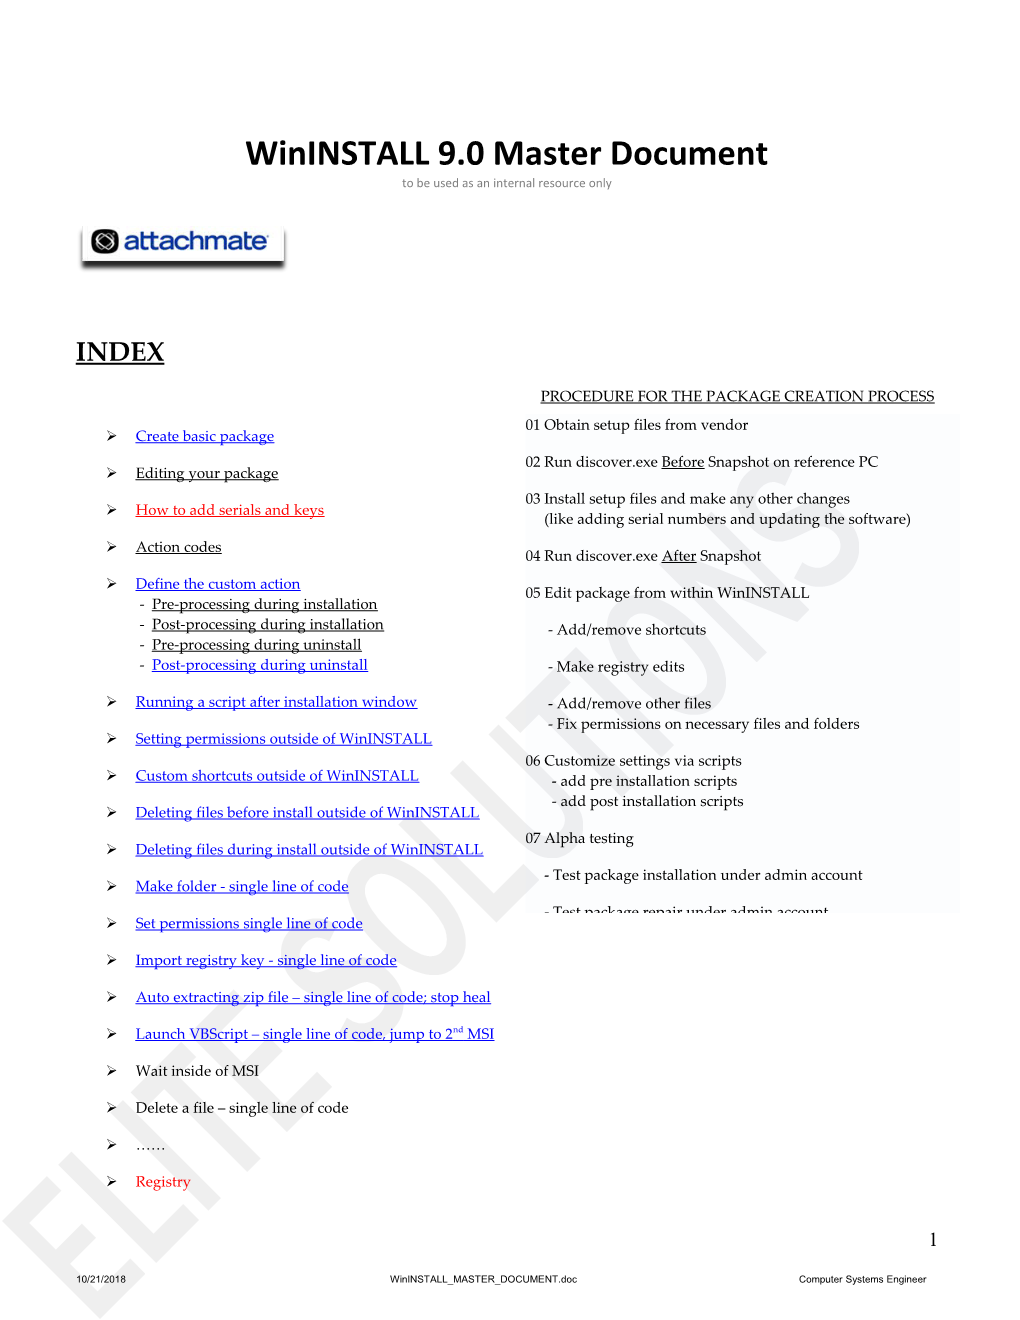 Wininstall 9.0 Master Document to Be Used As an Internal Resource Only